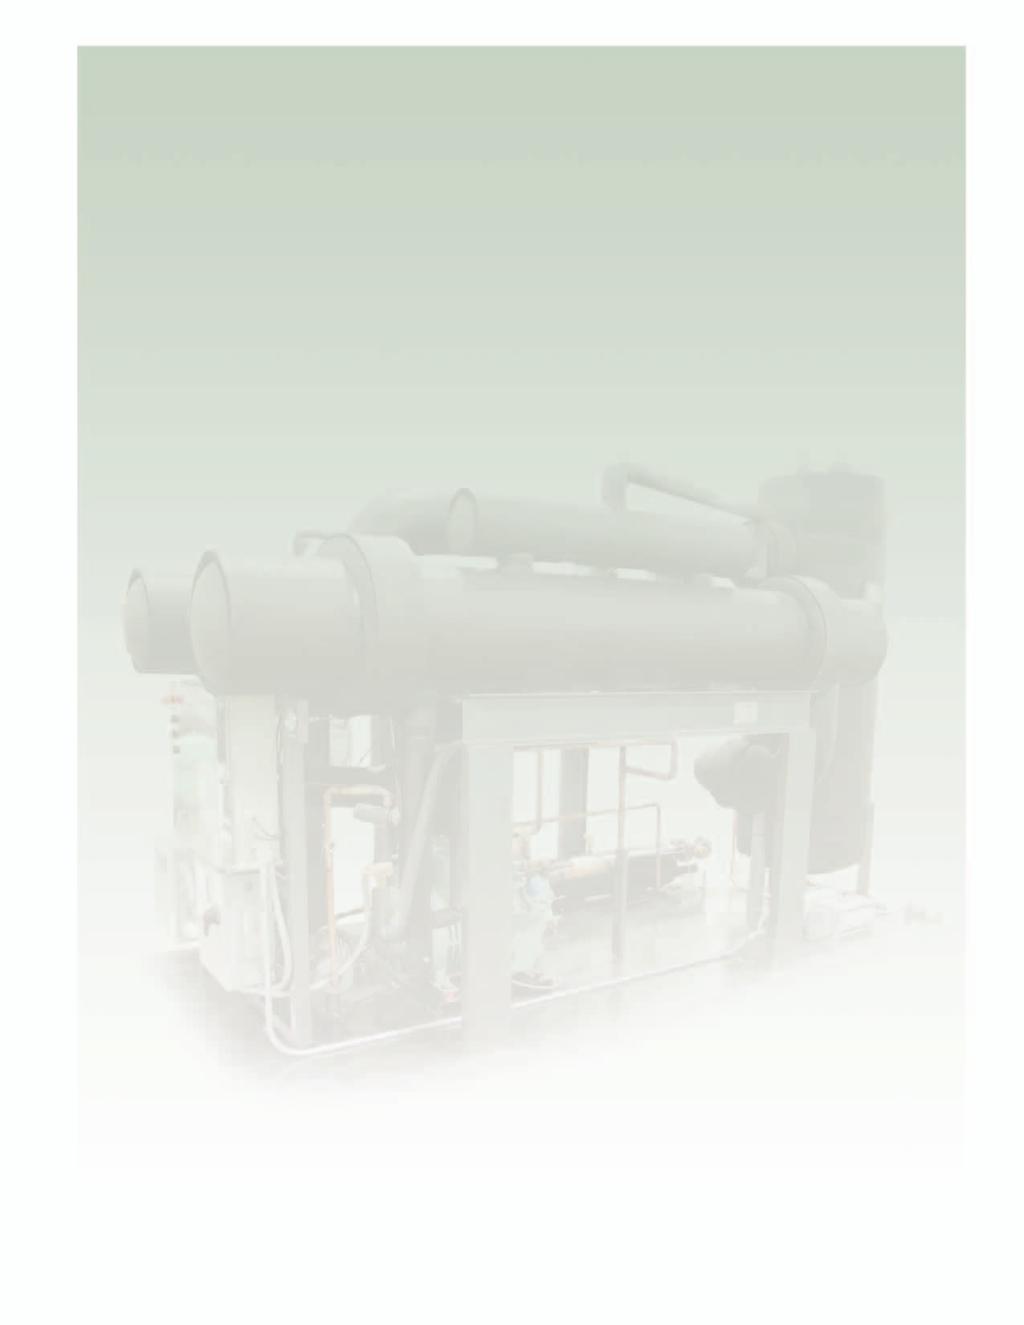 Landfill / Digester Gas Circuit Saturated gas enters the tubes of the gas to gas Heat Exchanger 1 where it is pre-cooled by the cold gas returning through the shell from the evaporator.